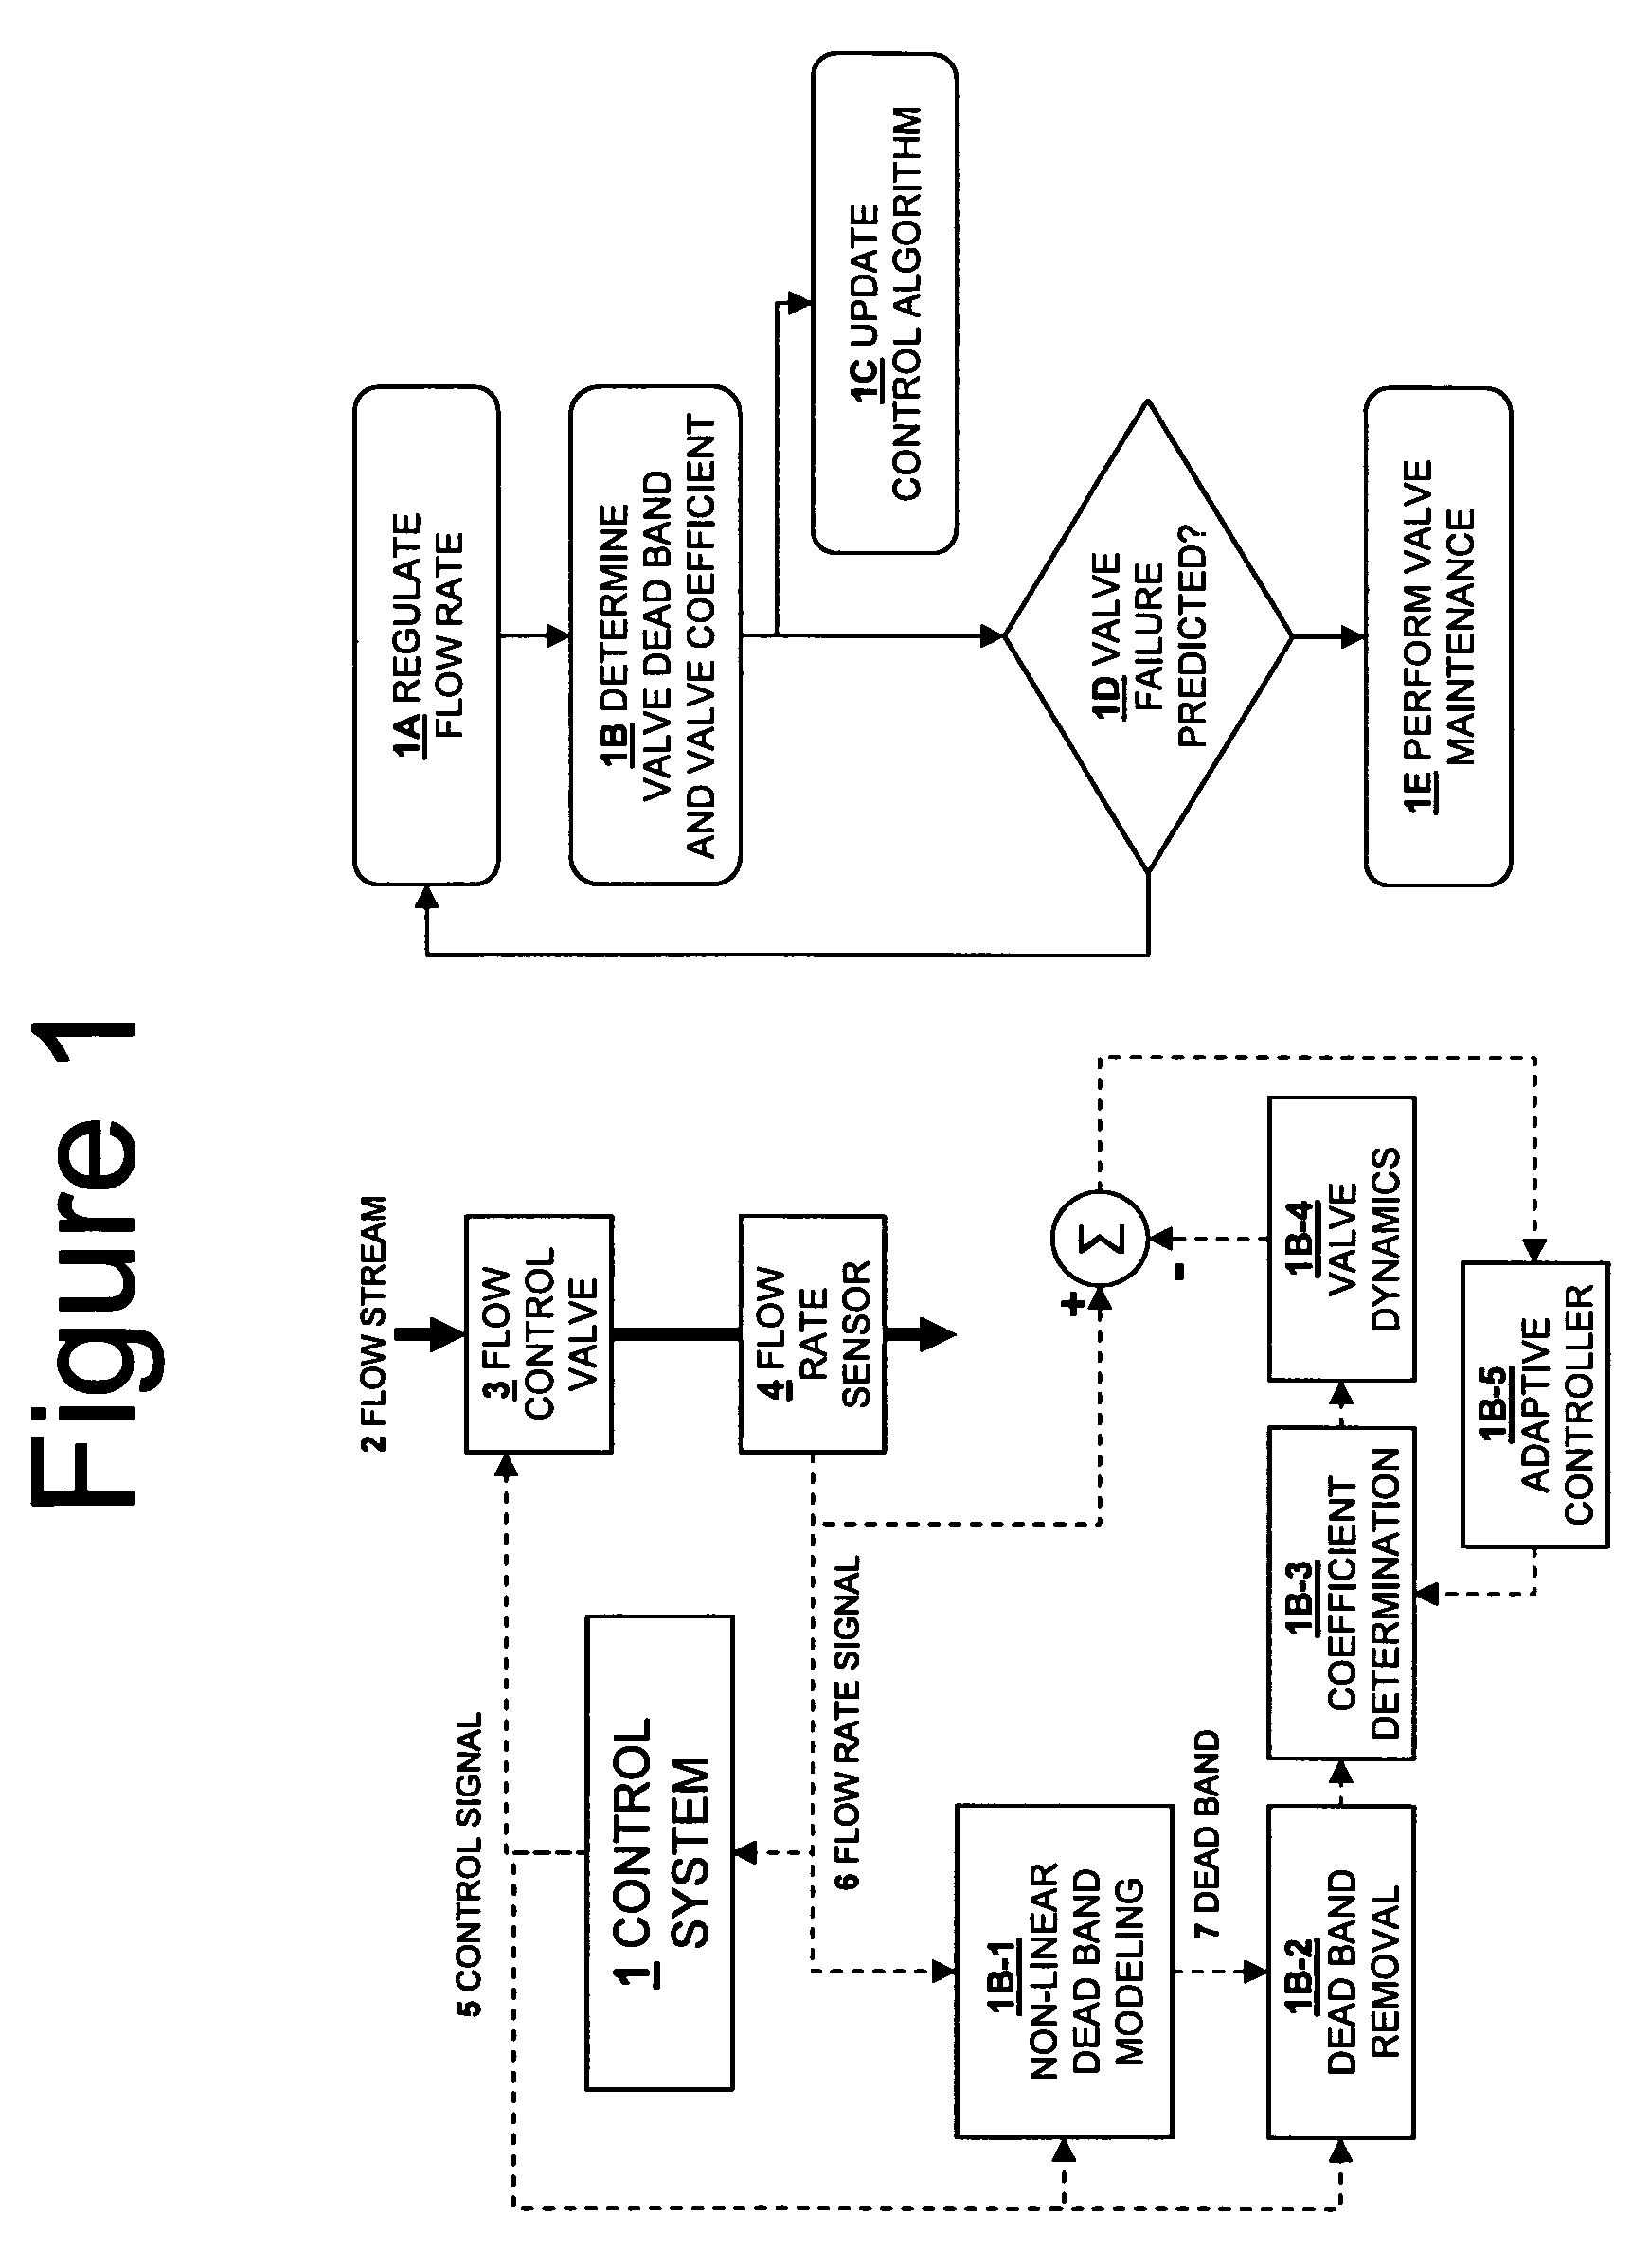 Methods for managing flow control valves in process systems